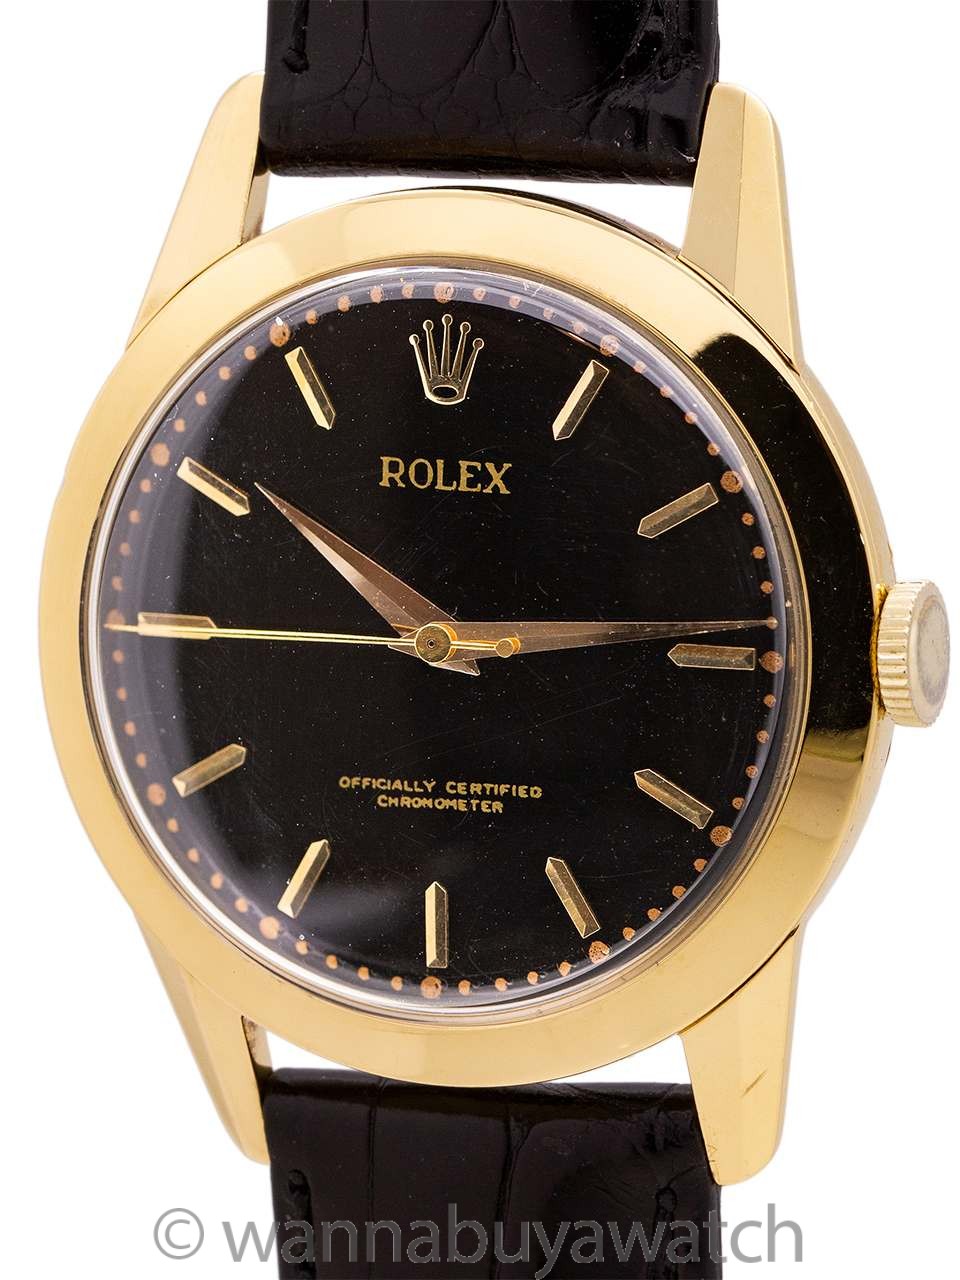 Rolex, Oyster Perpetual Datejust, Automatic, 750/18k Yellow Gold, Ref. 8570